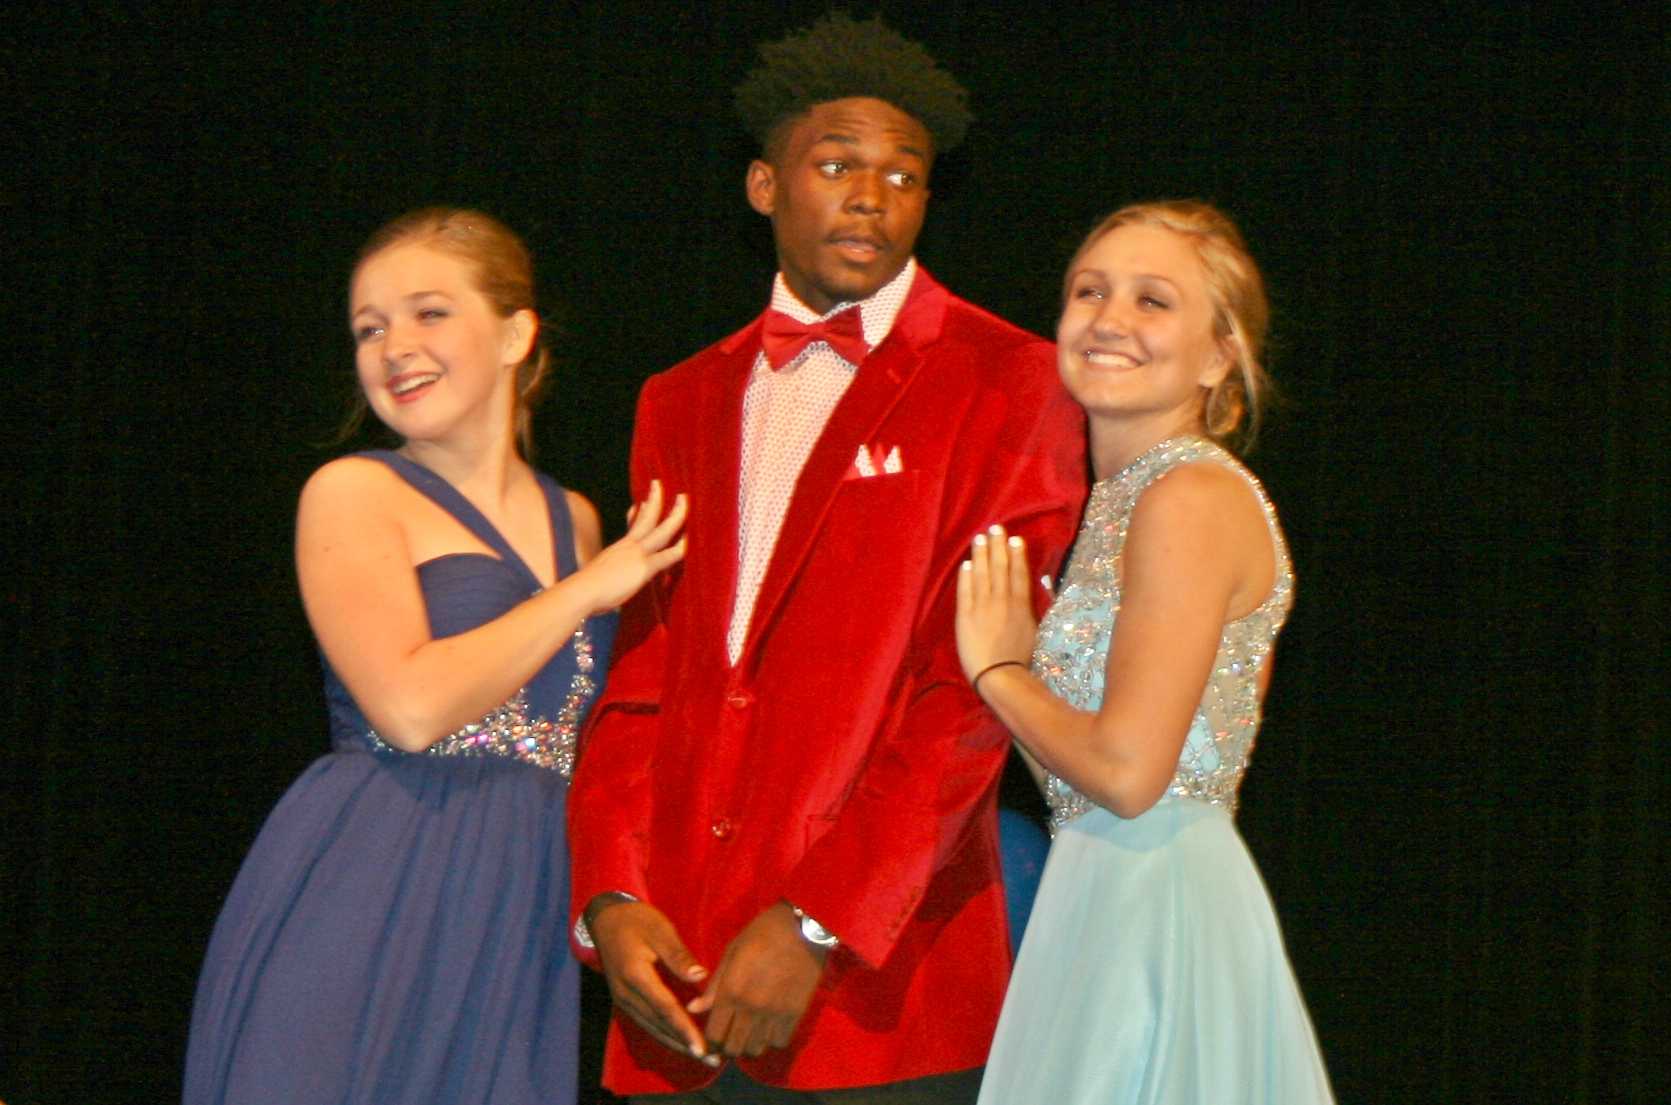 Senior Brieanna Boven (left) escorts ? during formal wear competition with ?